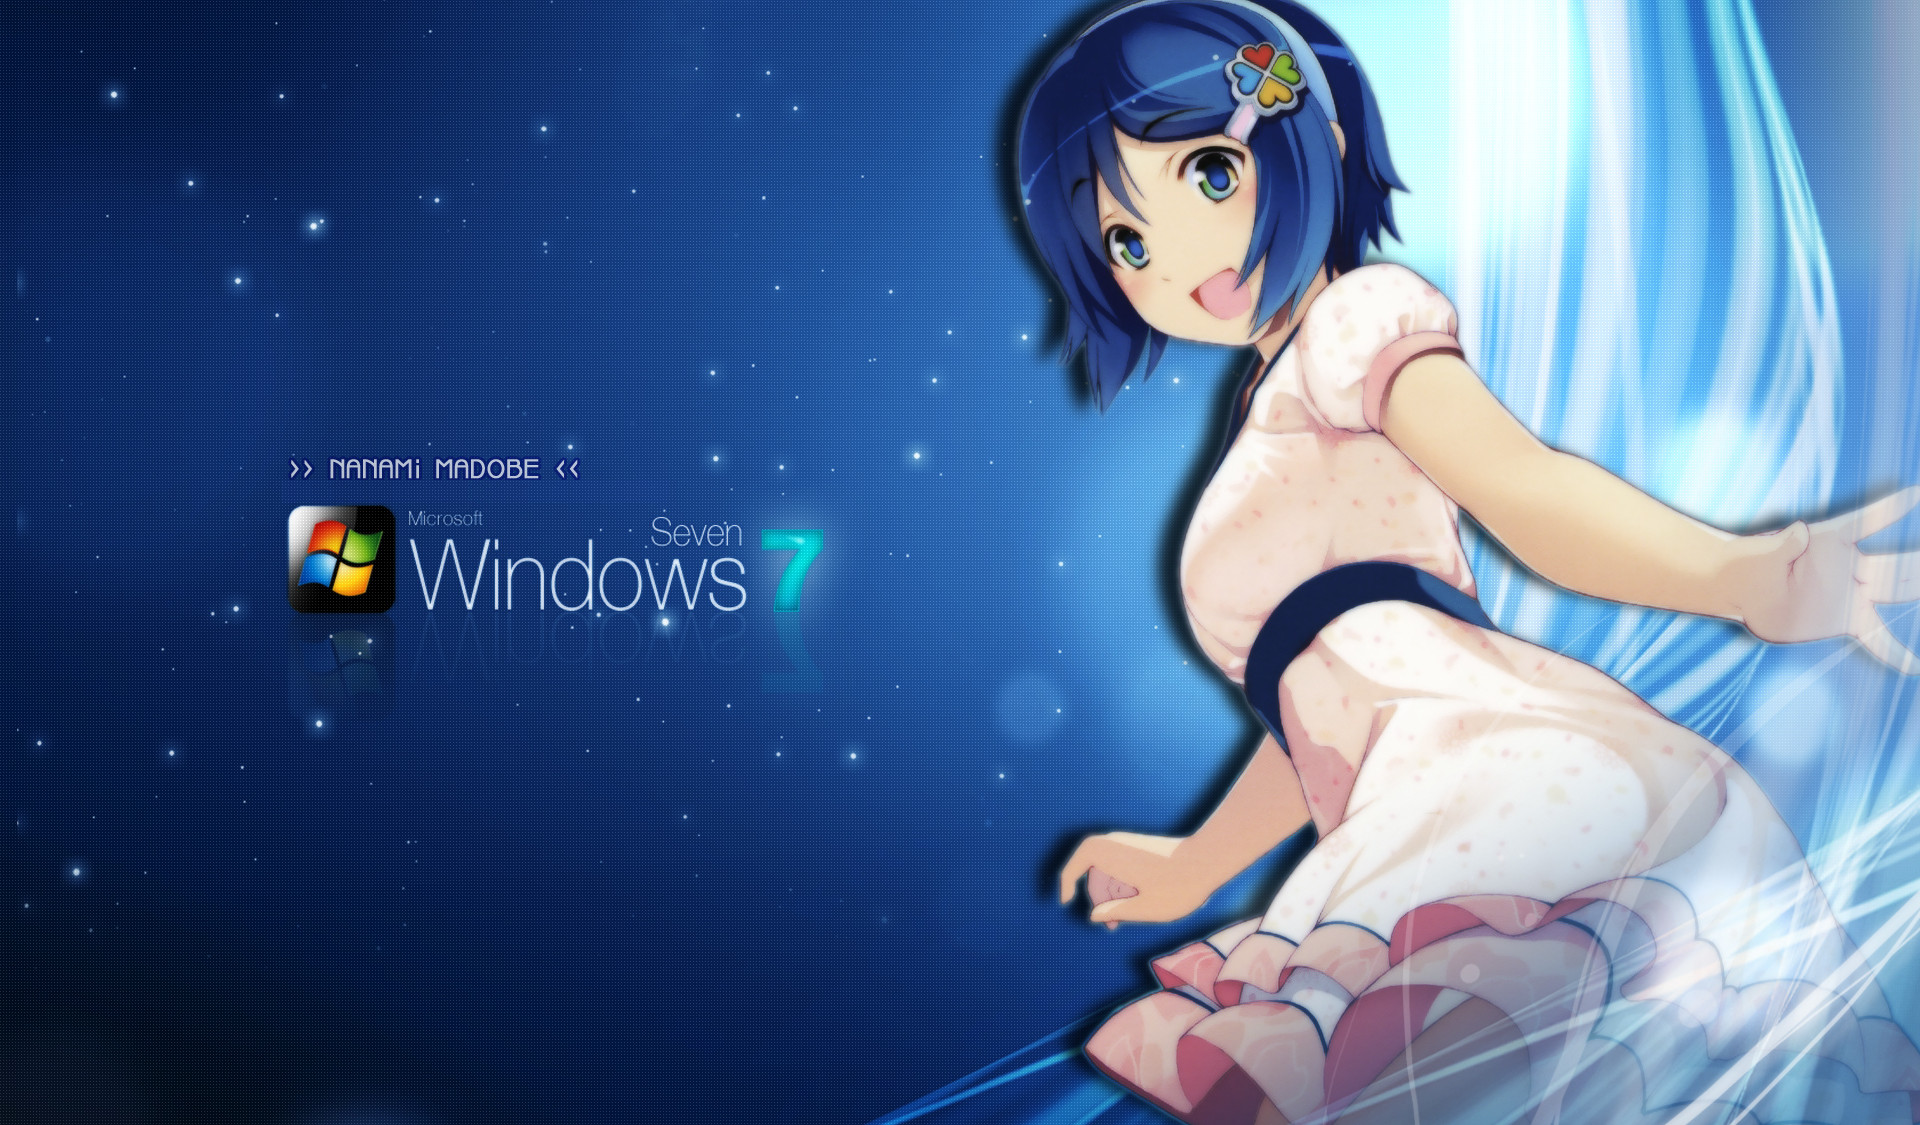 1920x1125 Gadgets Images of Windows 10 Anime by Cowessess Hurd